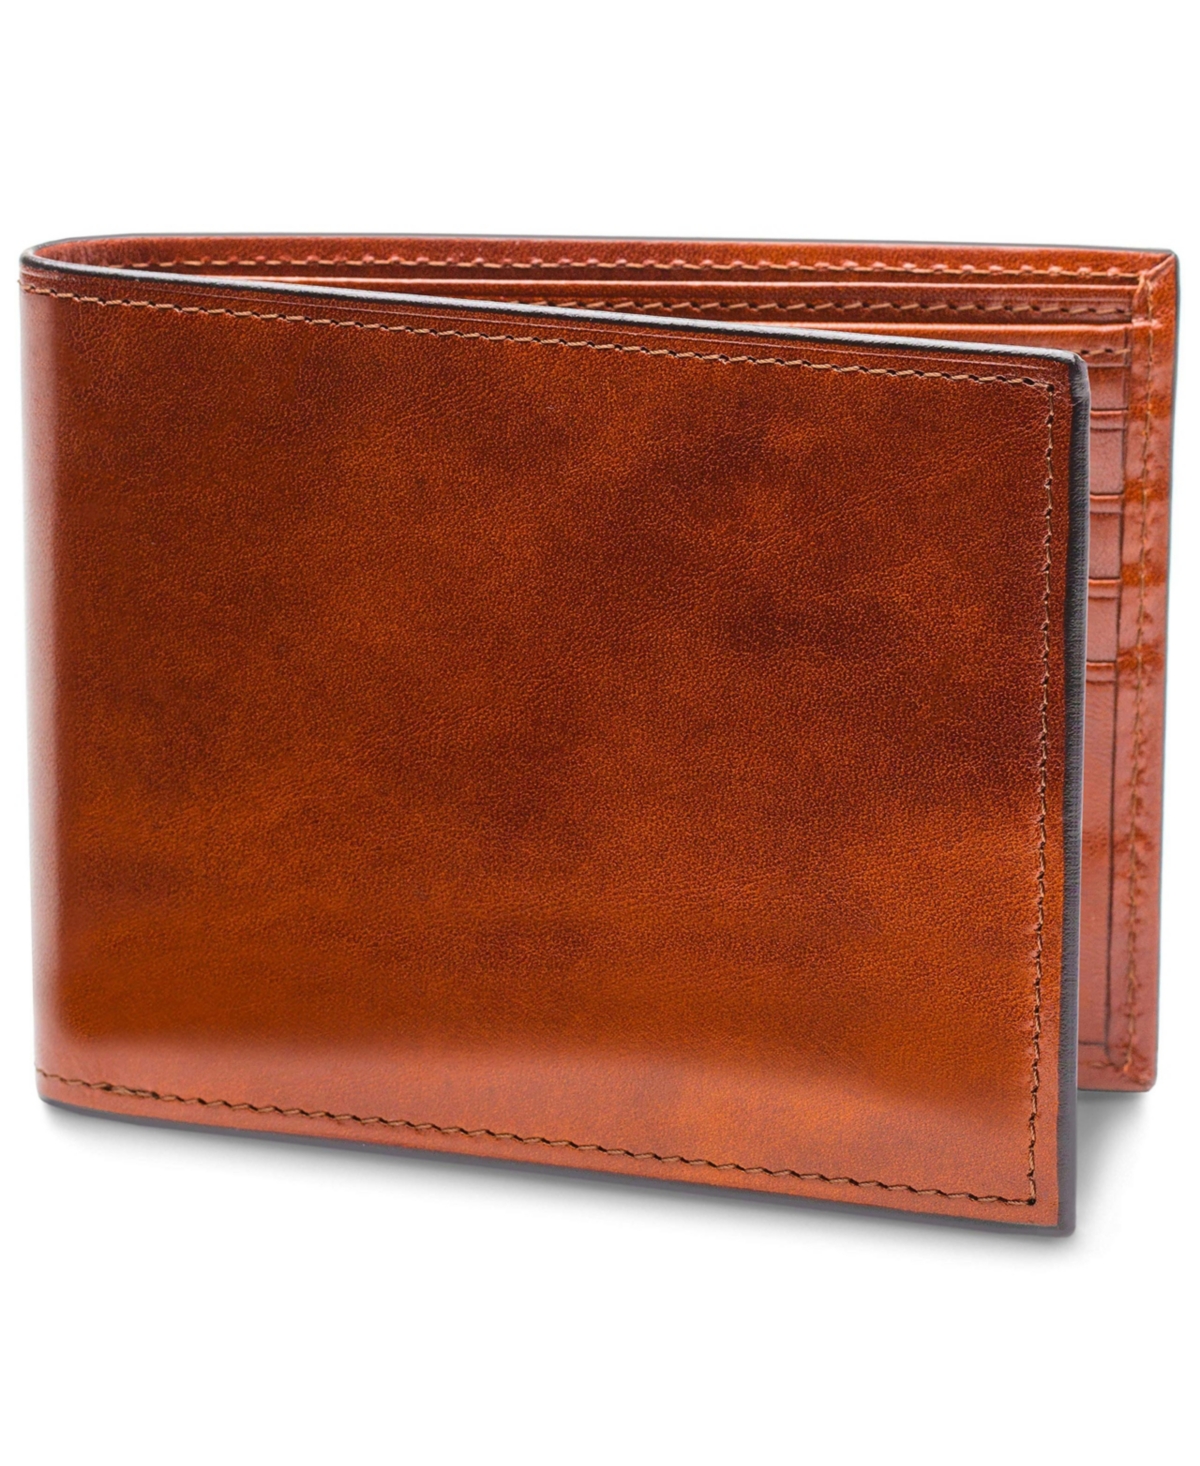 Men's Wallet, Old Leather Continental Bifold Wallet with I.d. Flap - Amber